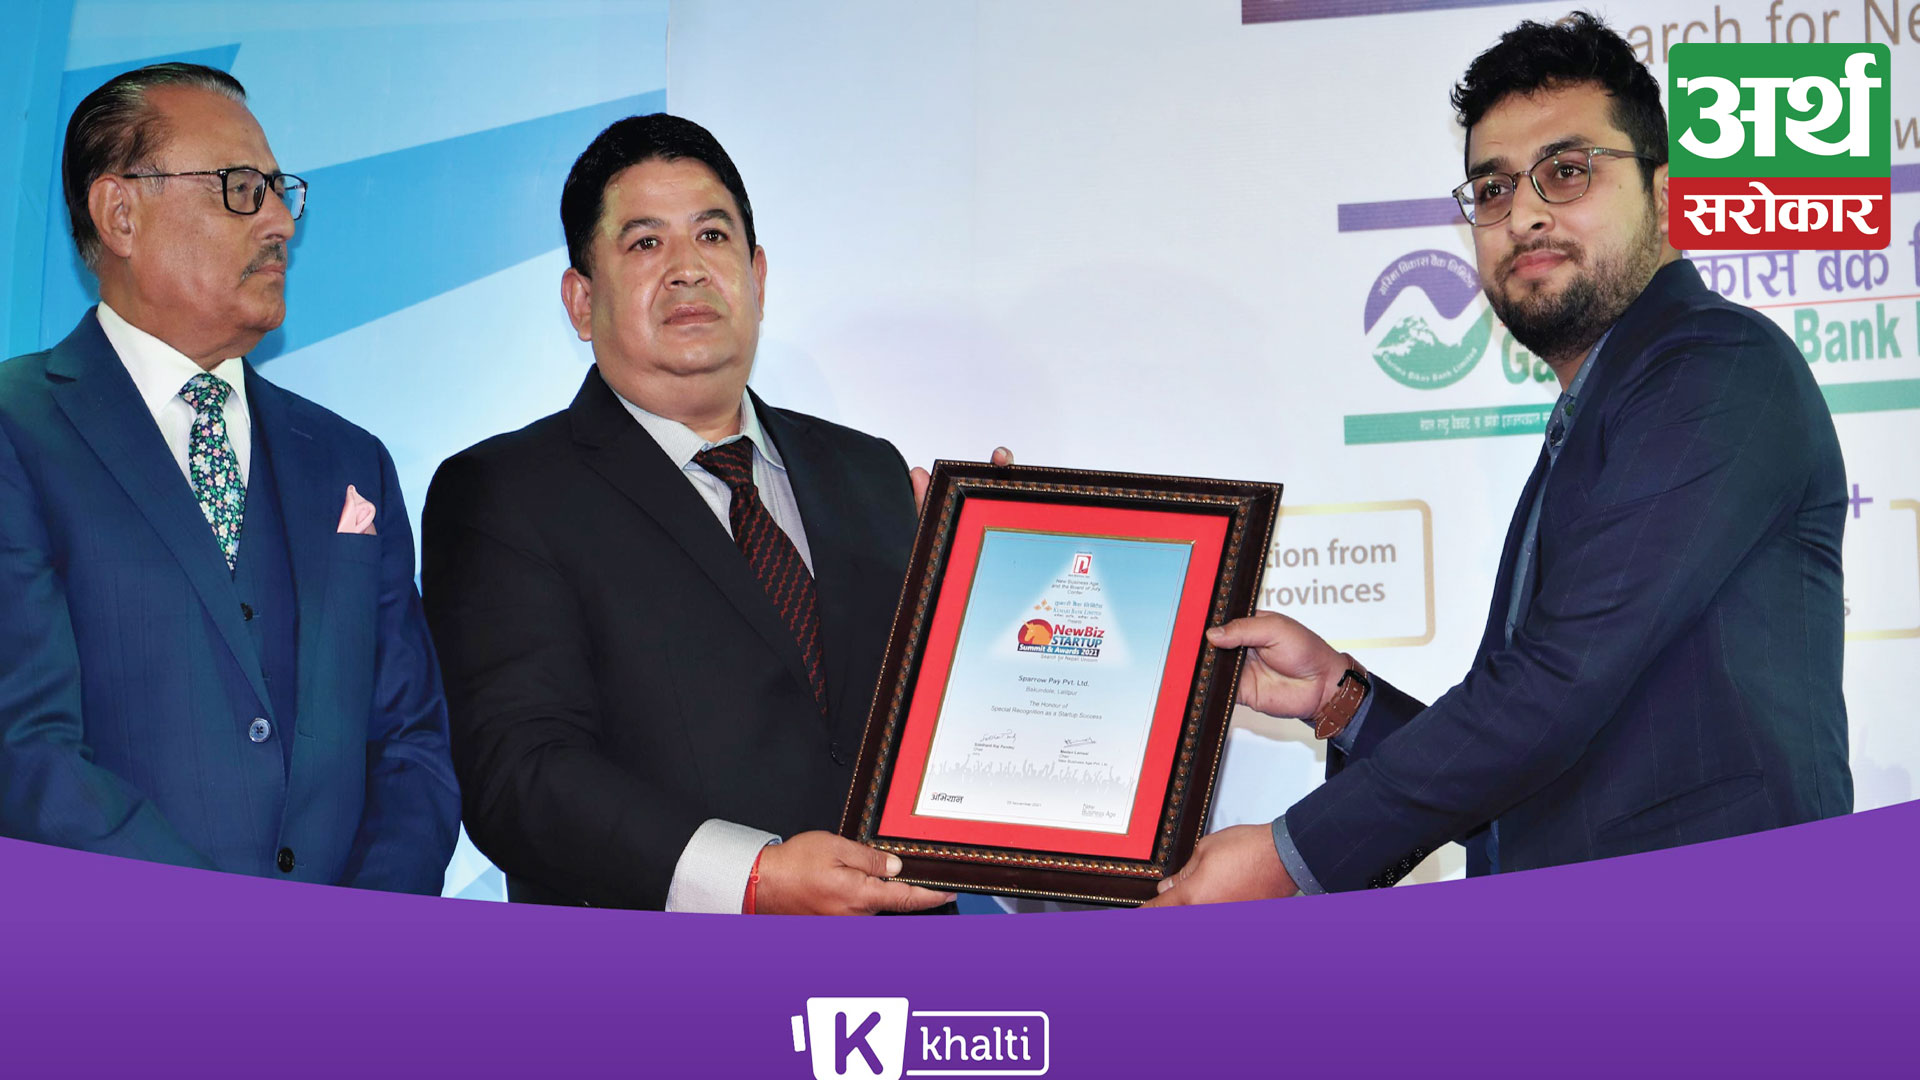 Khalti awarded with “The Honour of Special Recognition as a Startup Success”